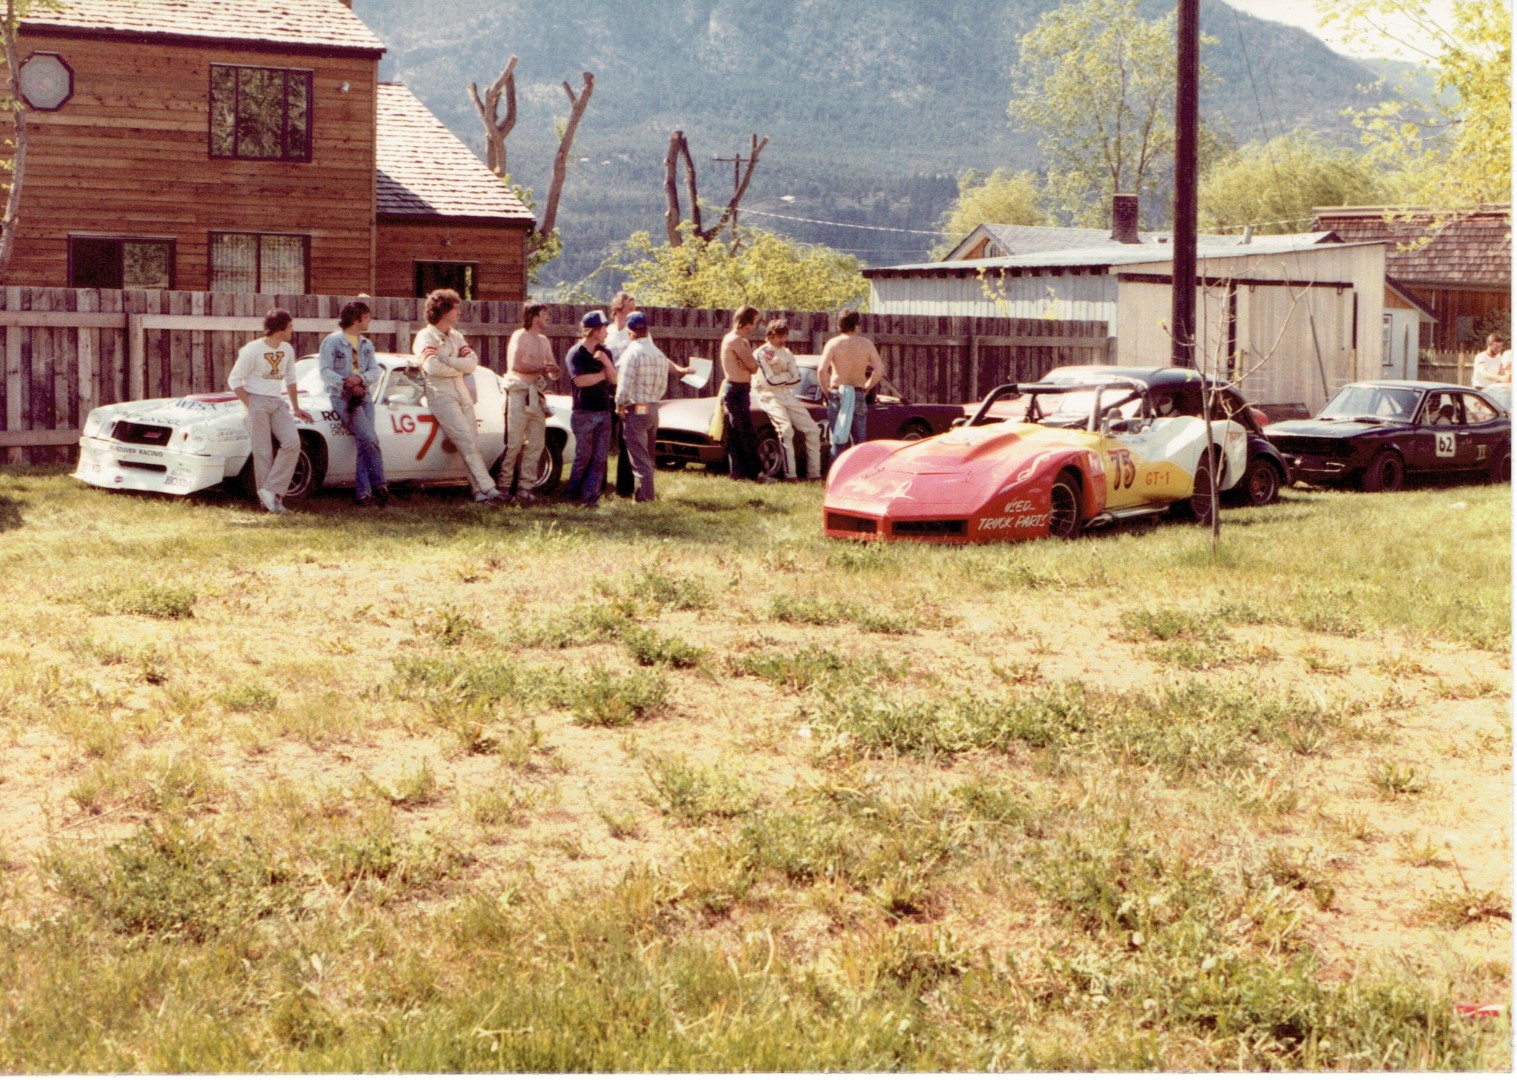 That is Pete Baljet in the LG73 Car, who beat me on my first try, 1982, I vowed to beat his time and then some, which I did. That is the ex-GREENWOOD Corvette, which still is here in the lower mainland.